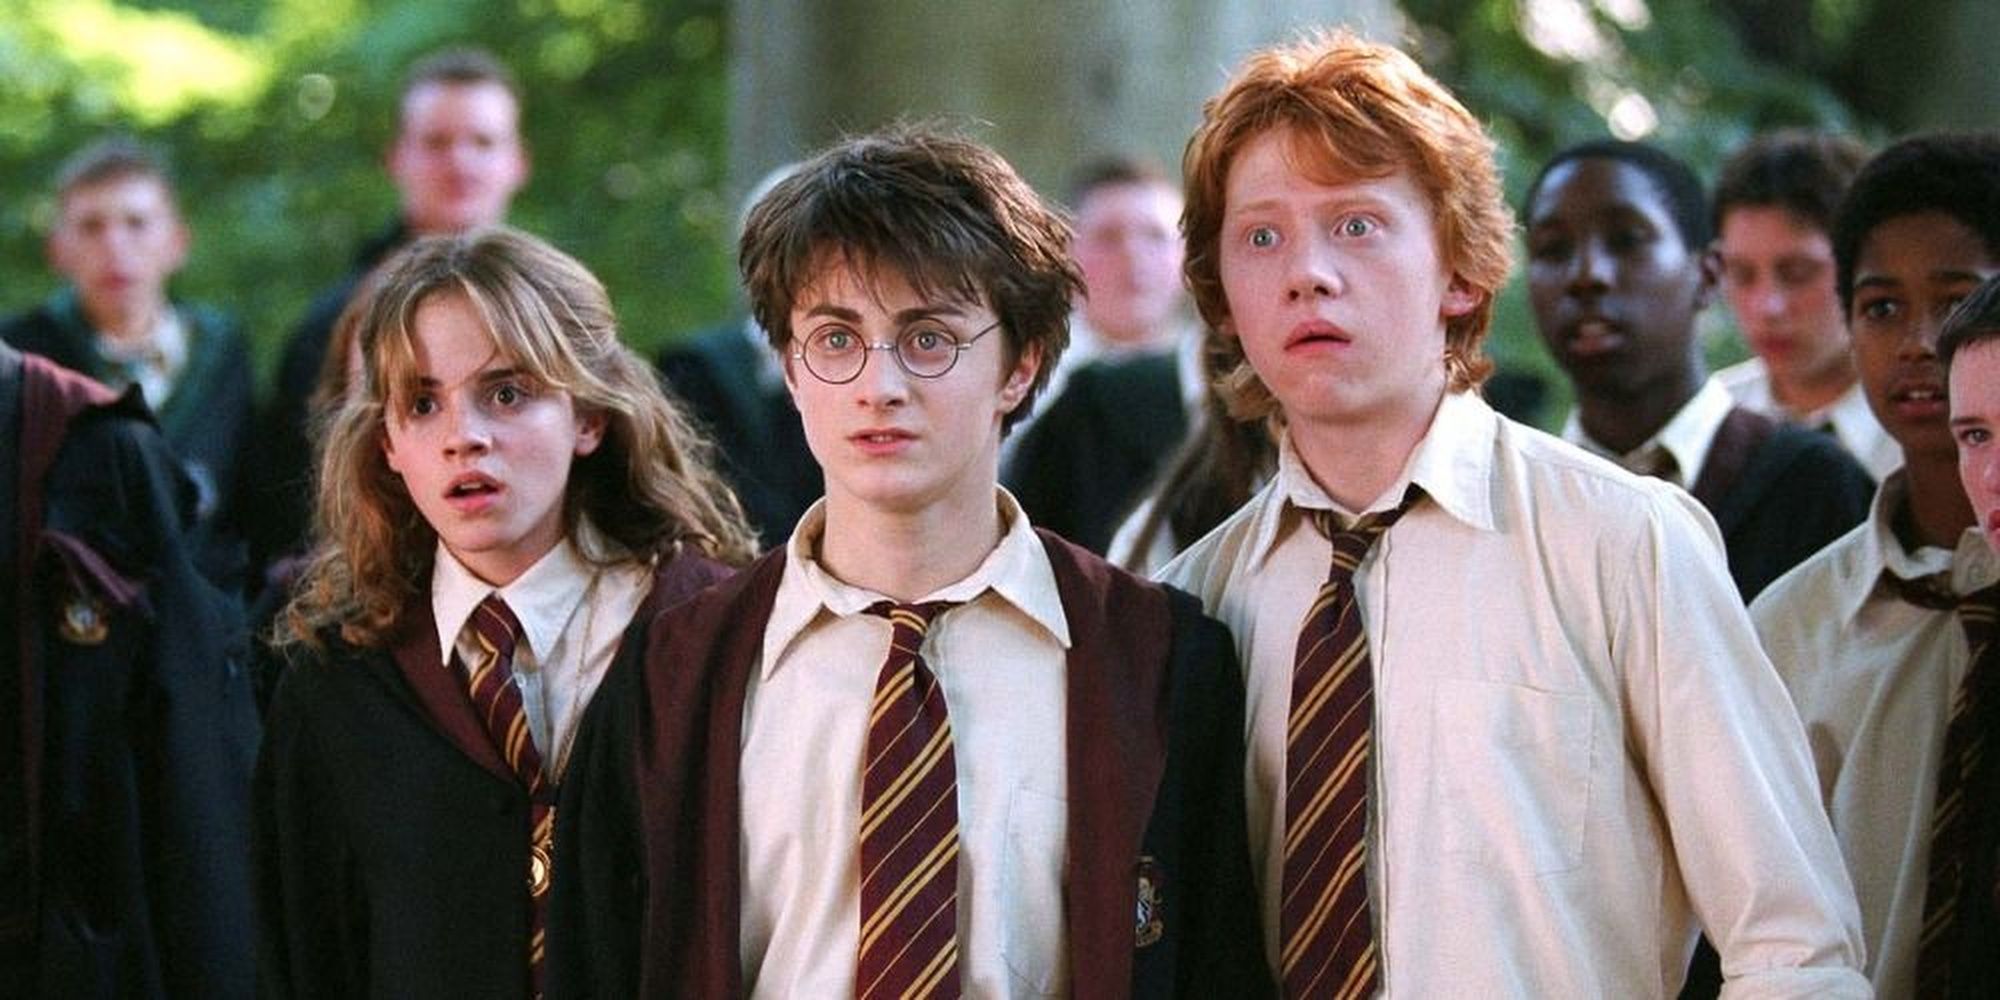 Hermione, Harry, and Ron looking in the same direction with confused expressions in Harry Potter and the Prisoner Of Azkaban.